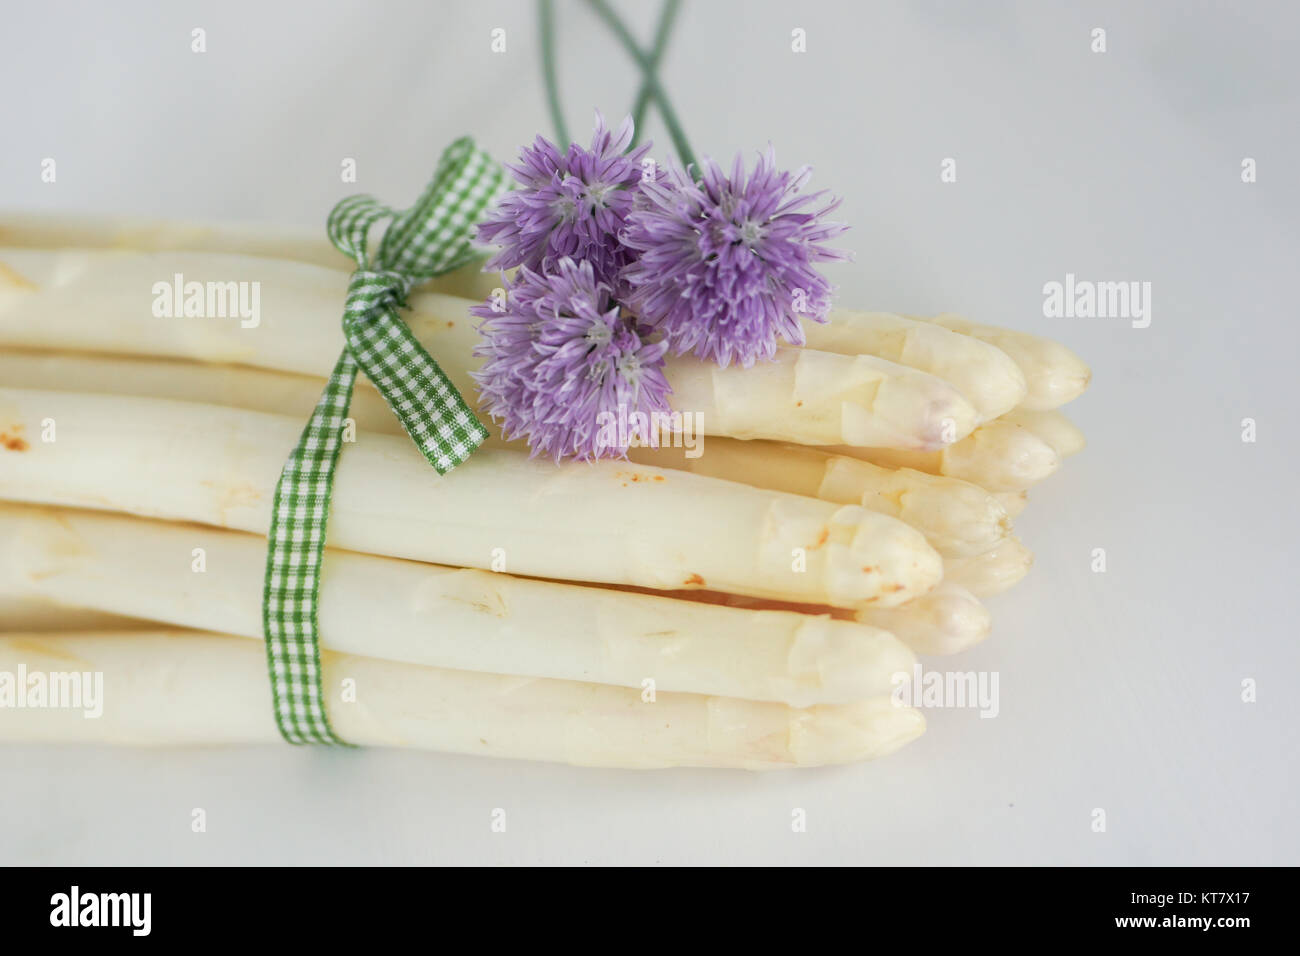 asparagus beautifully decorated with chives,flowers and ribbon with sweet potatoes Stock Photo